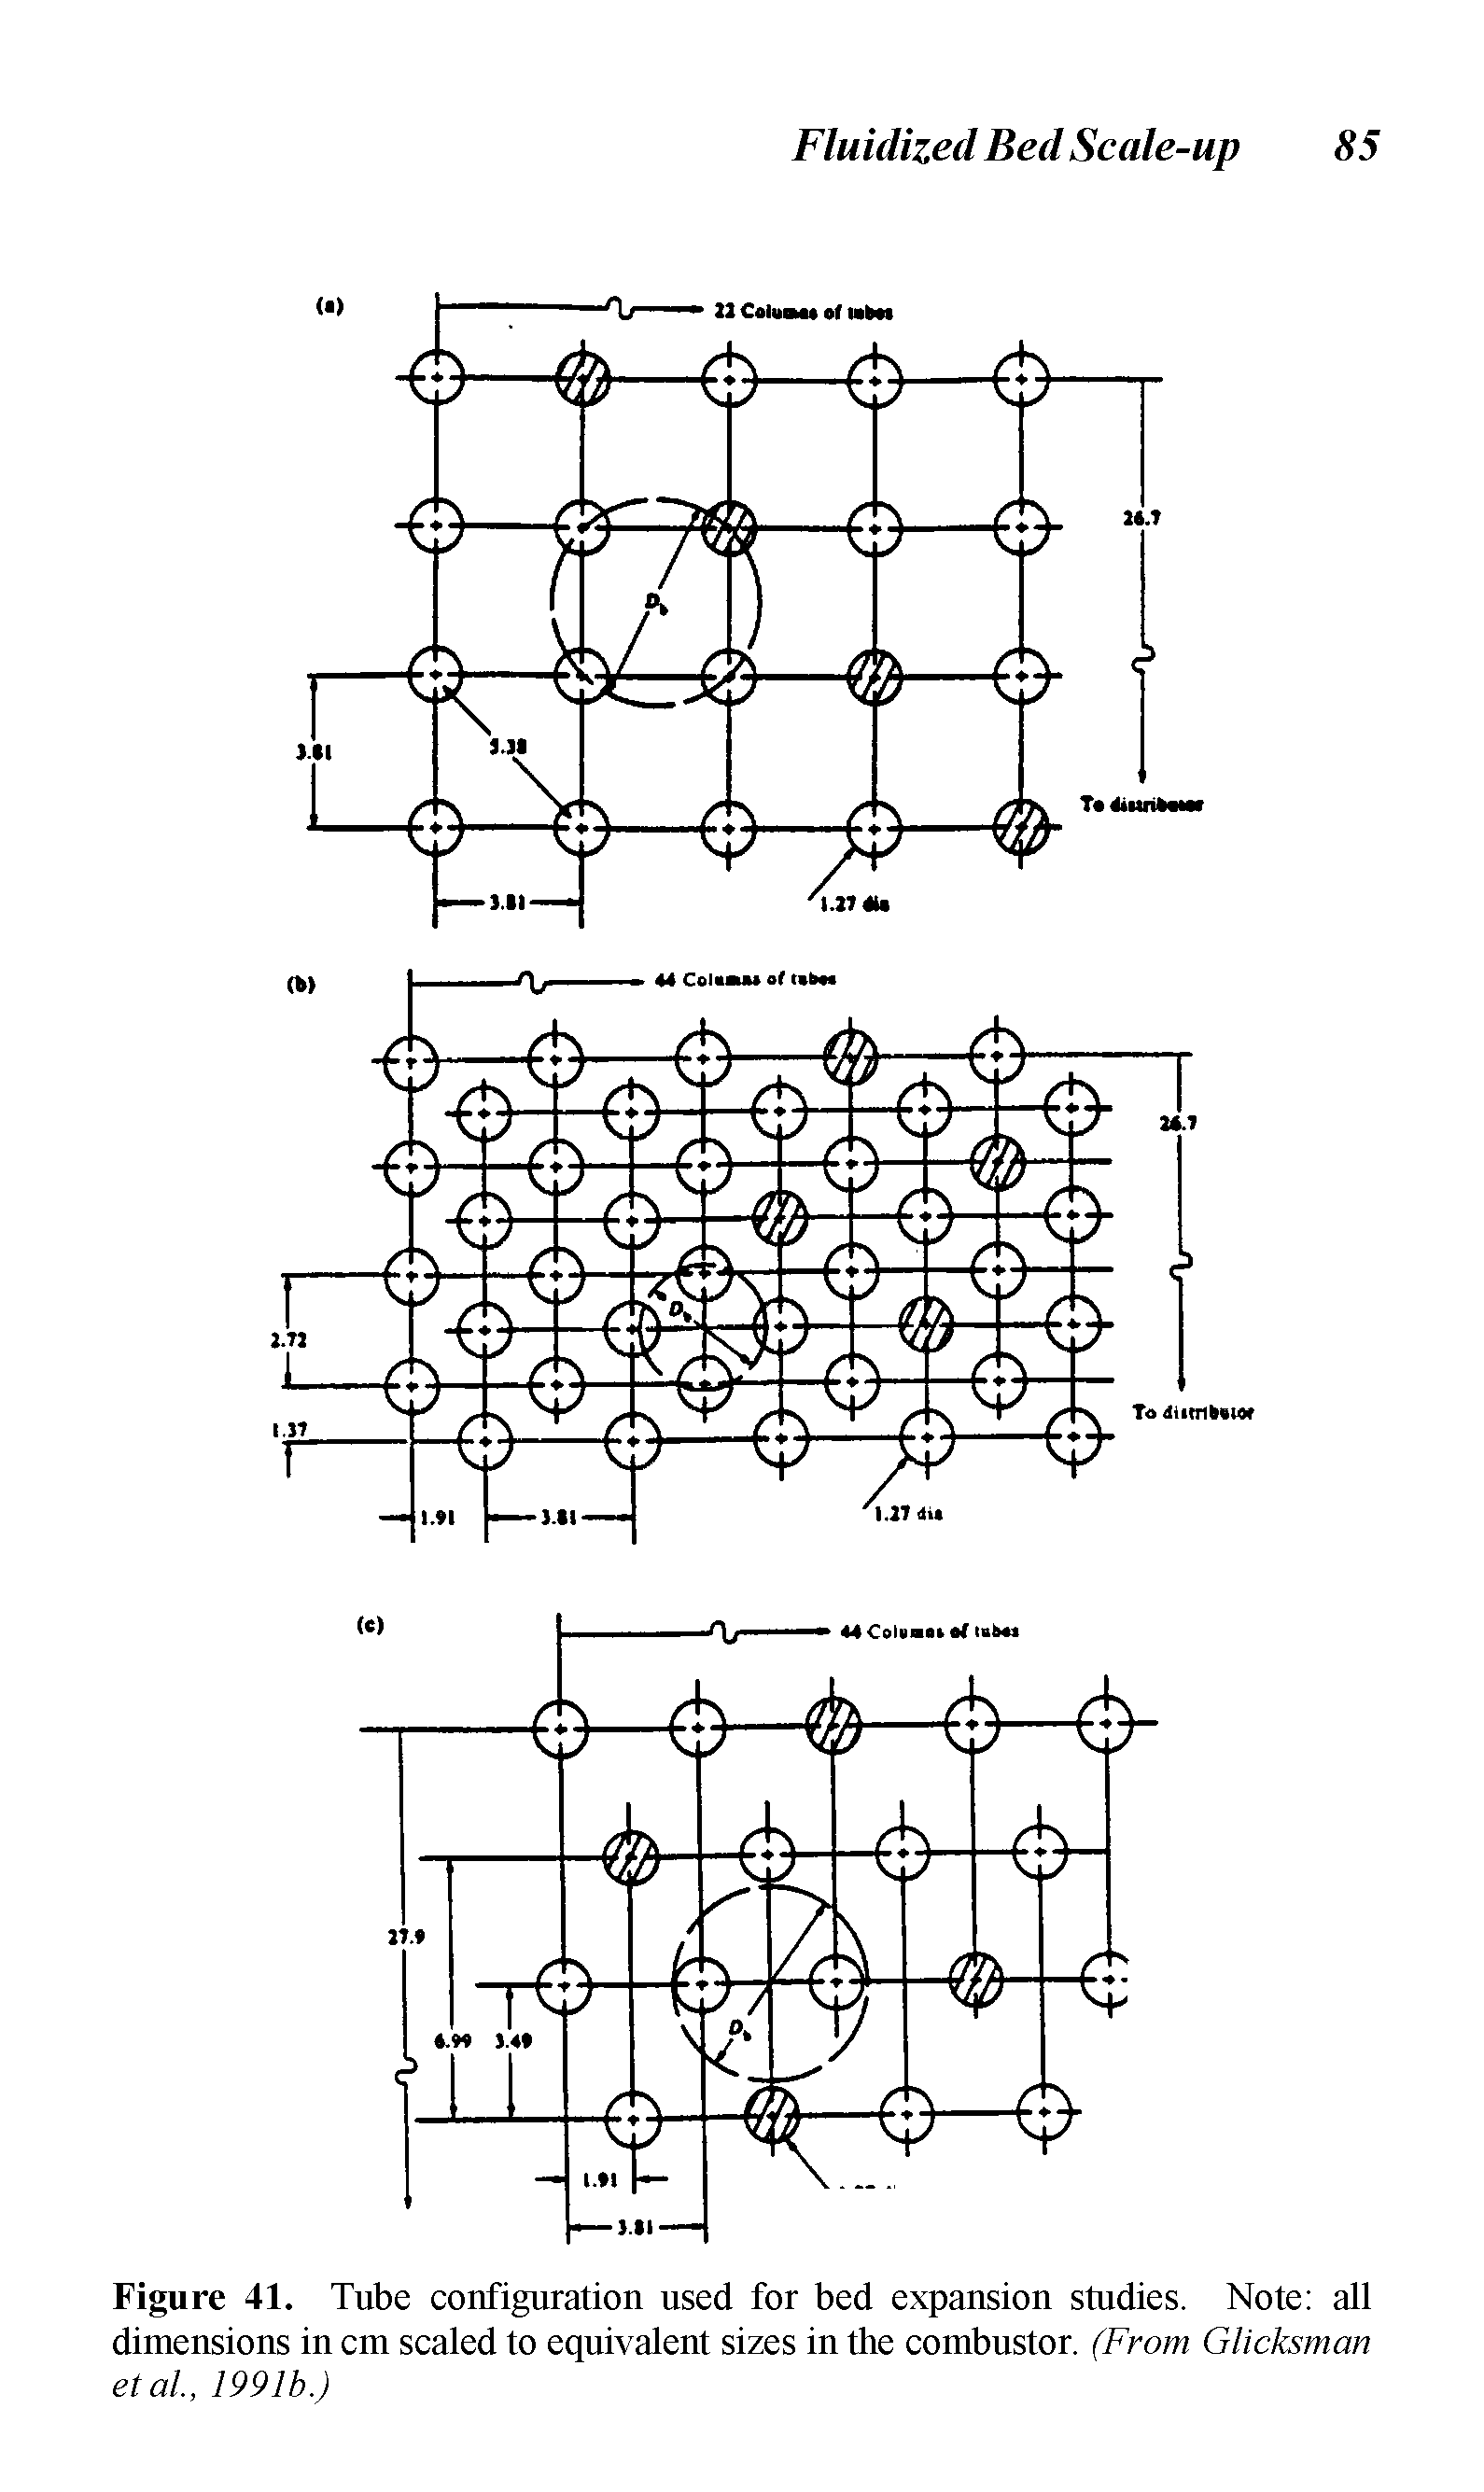 Figure 41. Tube configuration used for bed expansion studies. Note all dimensions in cm scaled to equivalent sizes in the combustor. (From Glicksman etal., 1991b.)...